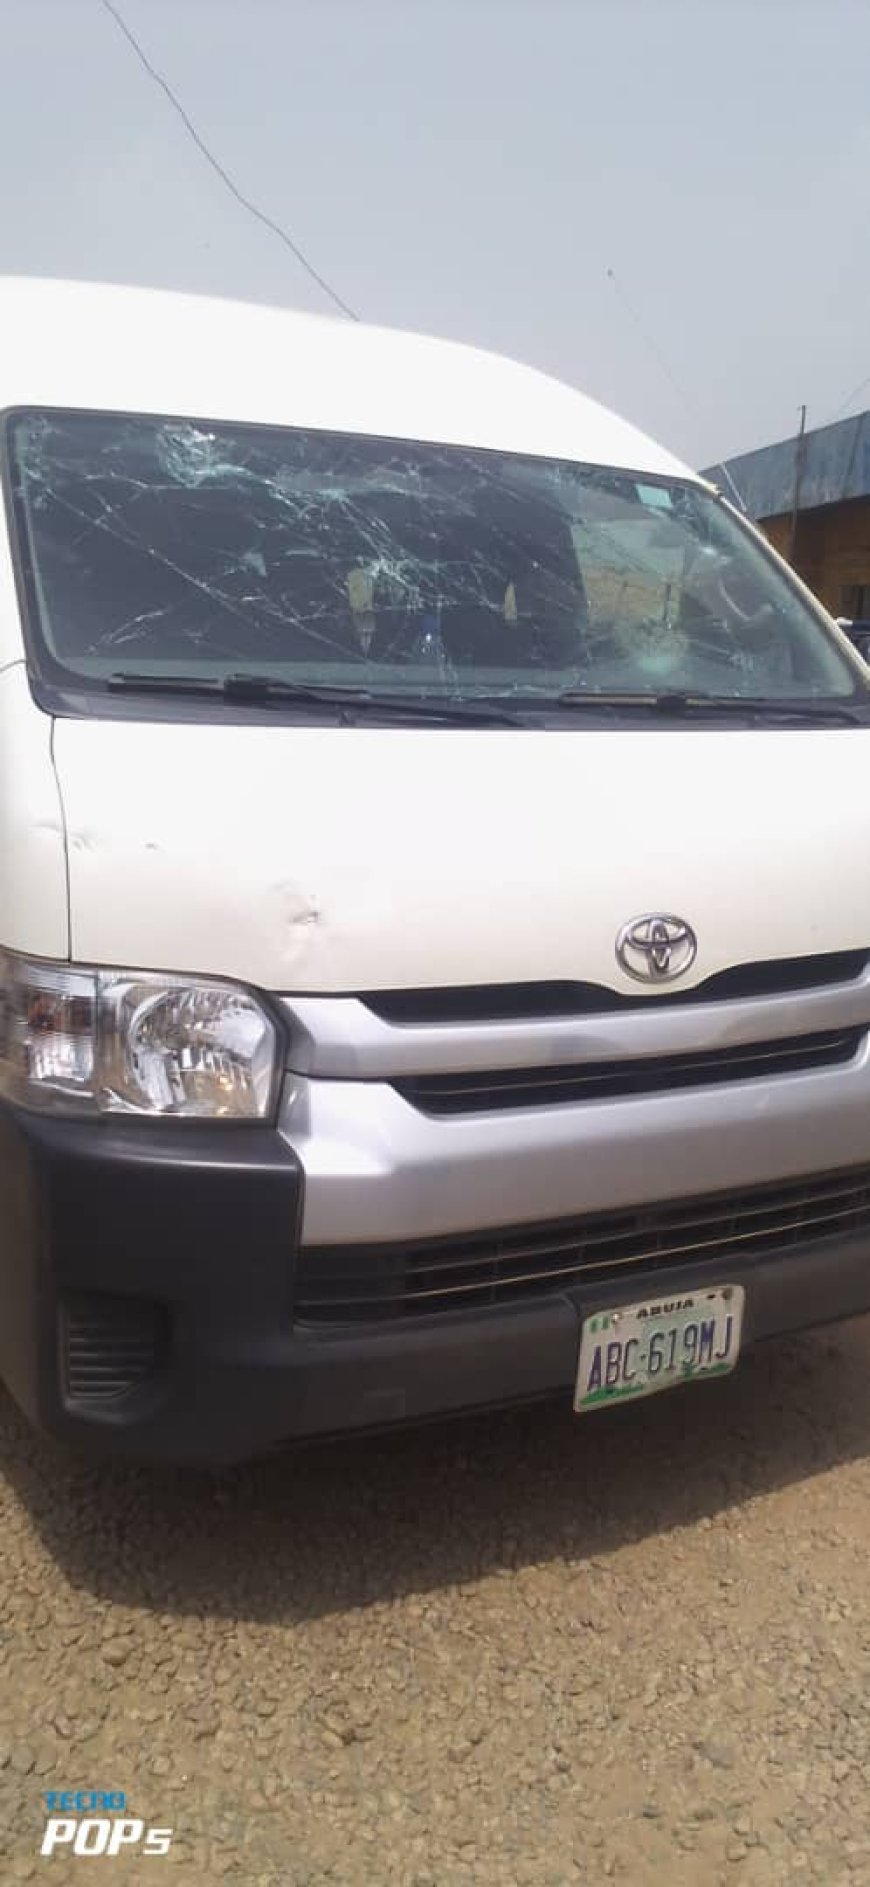 EFCC’s Election Monitoring Teams Attacked In Abuja, Imo